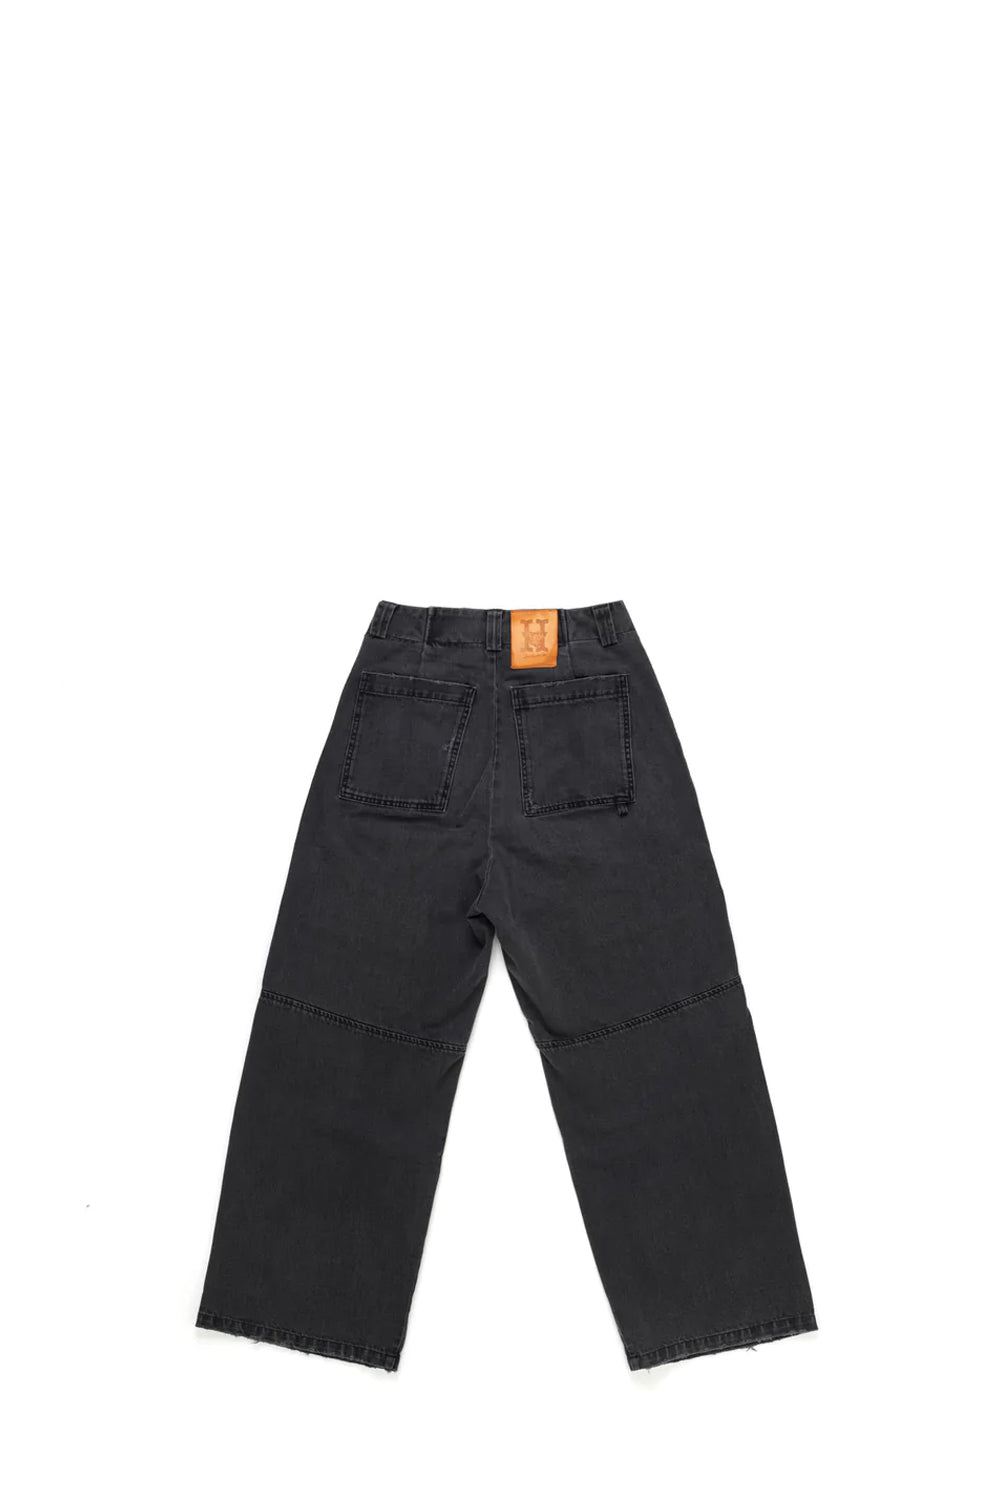 SK8 - WOMAN Cargo jeans with front button and zip closure. Frontal pockets. Back leather logo patch. Stonewashed coloring may vary. Five pockets. Composition: 100% Cotton HTC LOS ANGELES